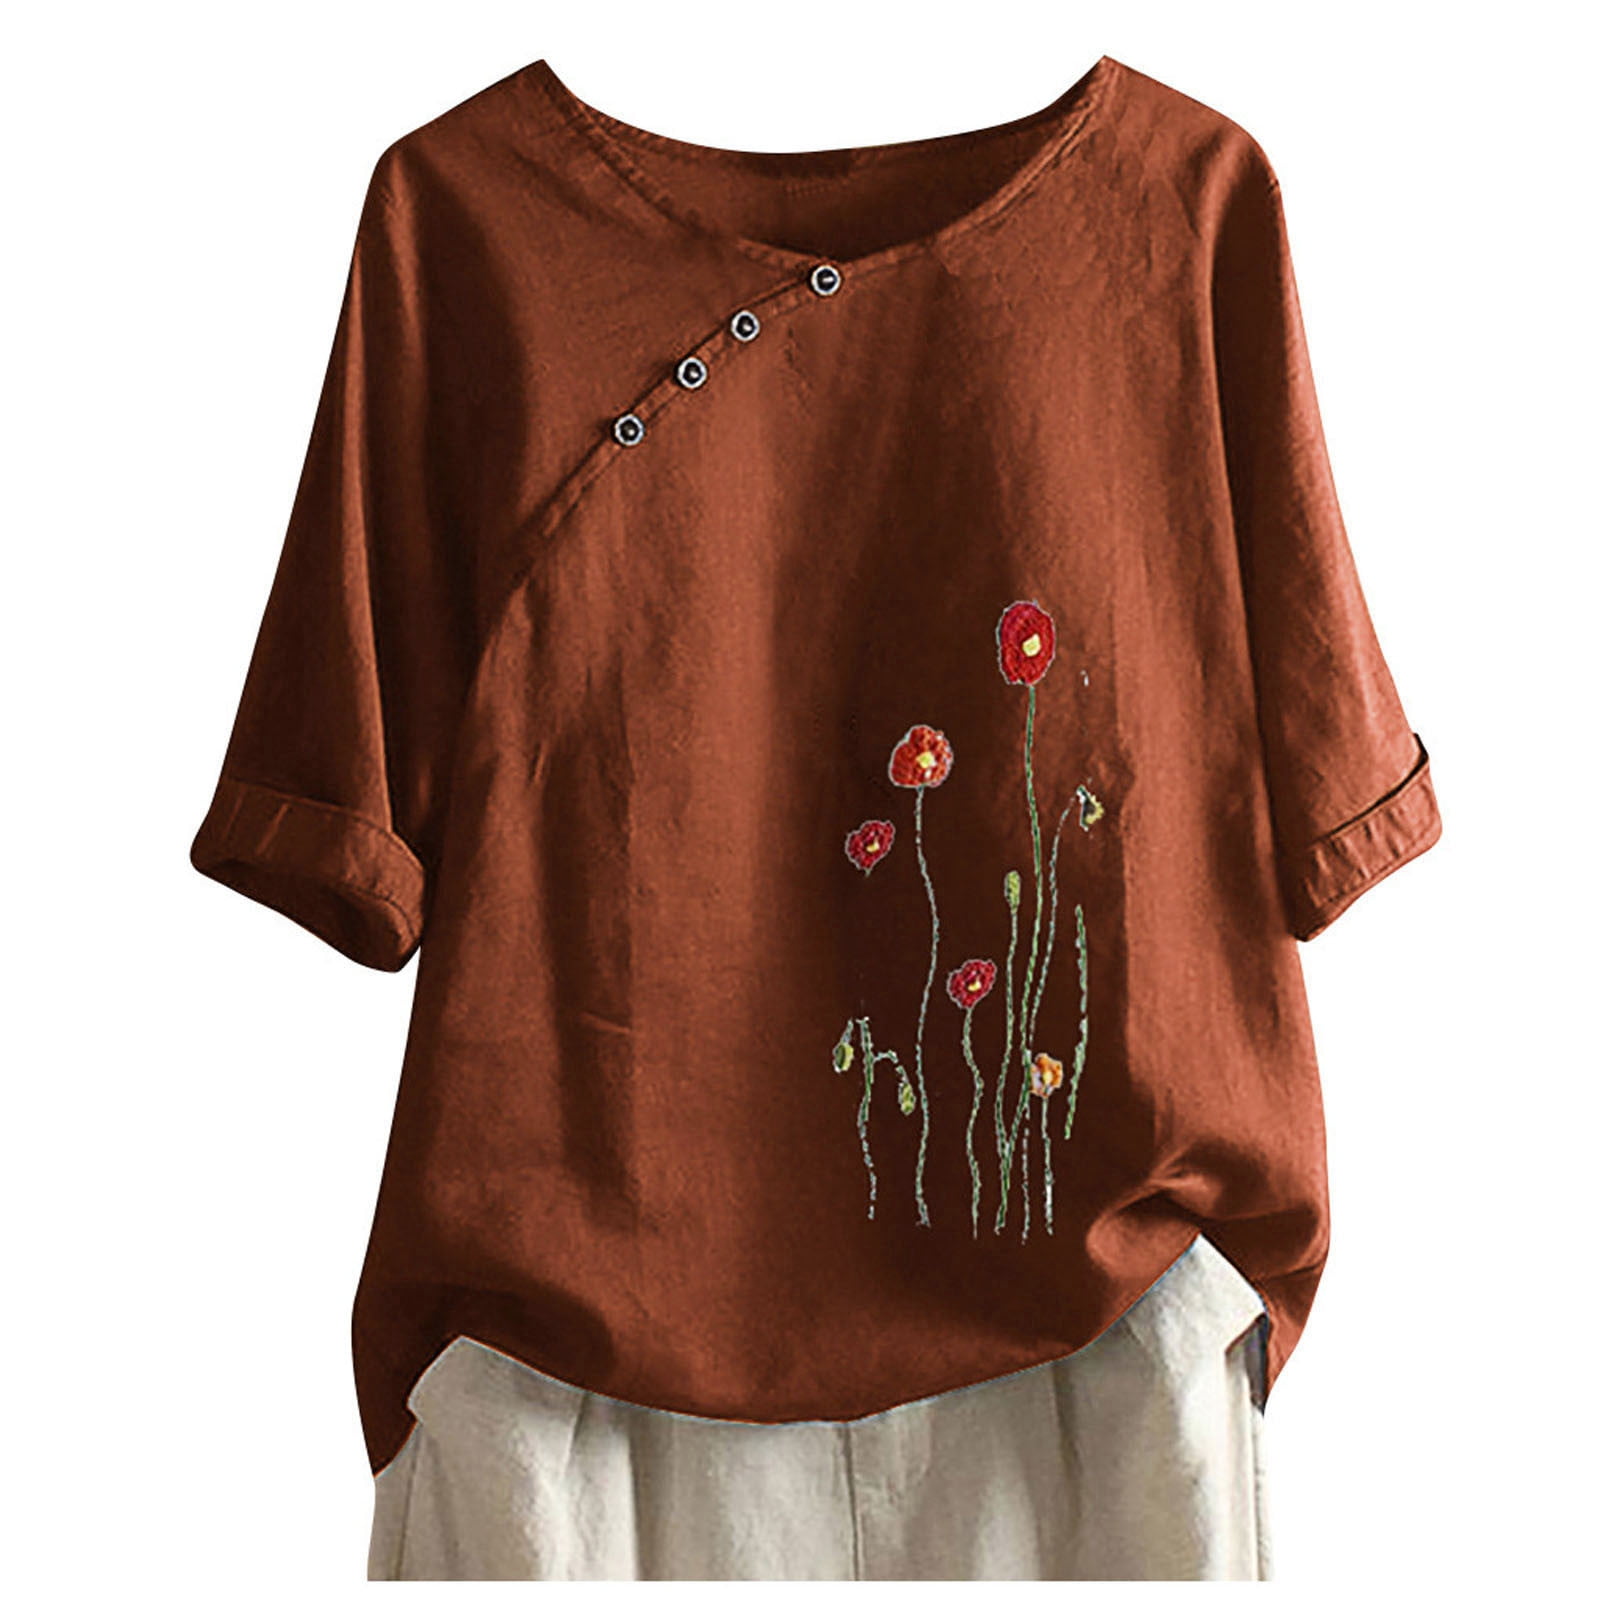 Women Summer Cotton Linen Tshirt Tops Casual Loose Fit Trendy Flowers Tunic Tee Short Sleeve Plus Size Button Blouse 